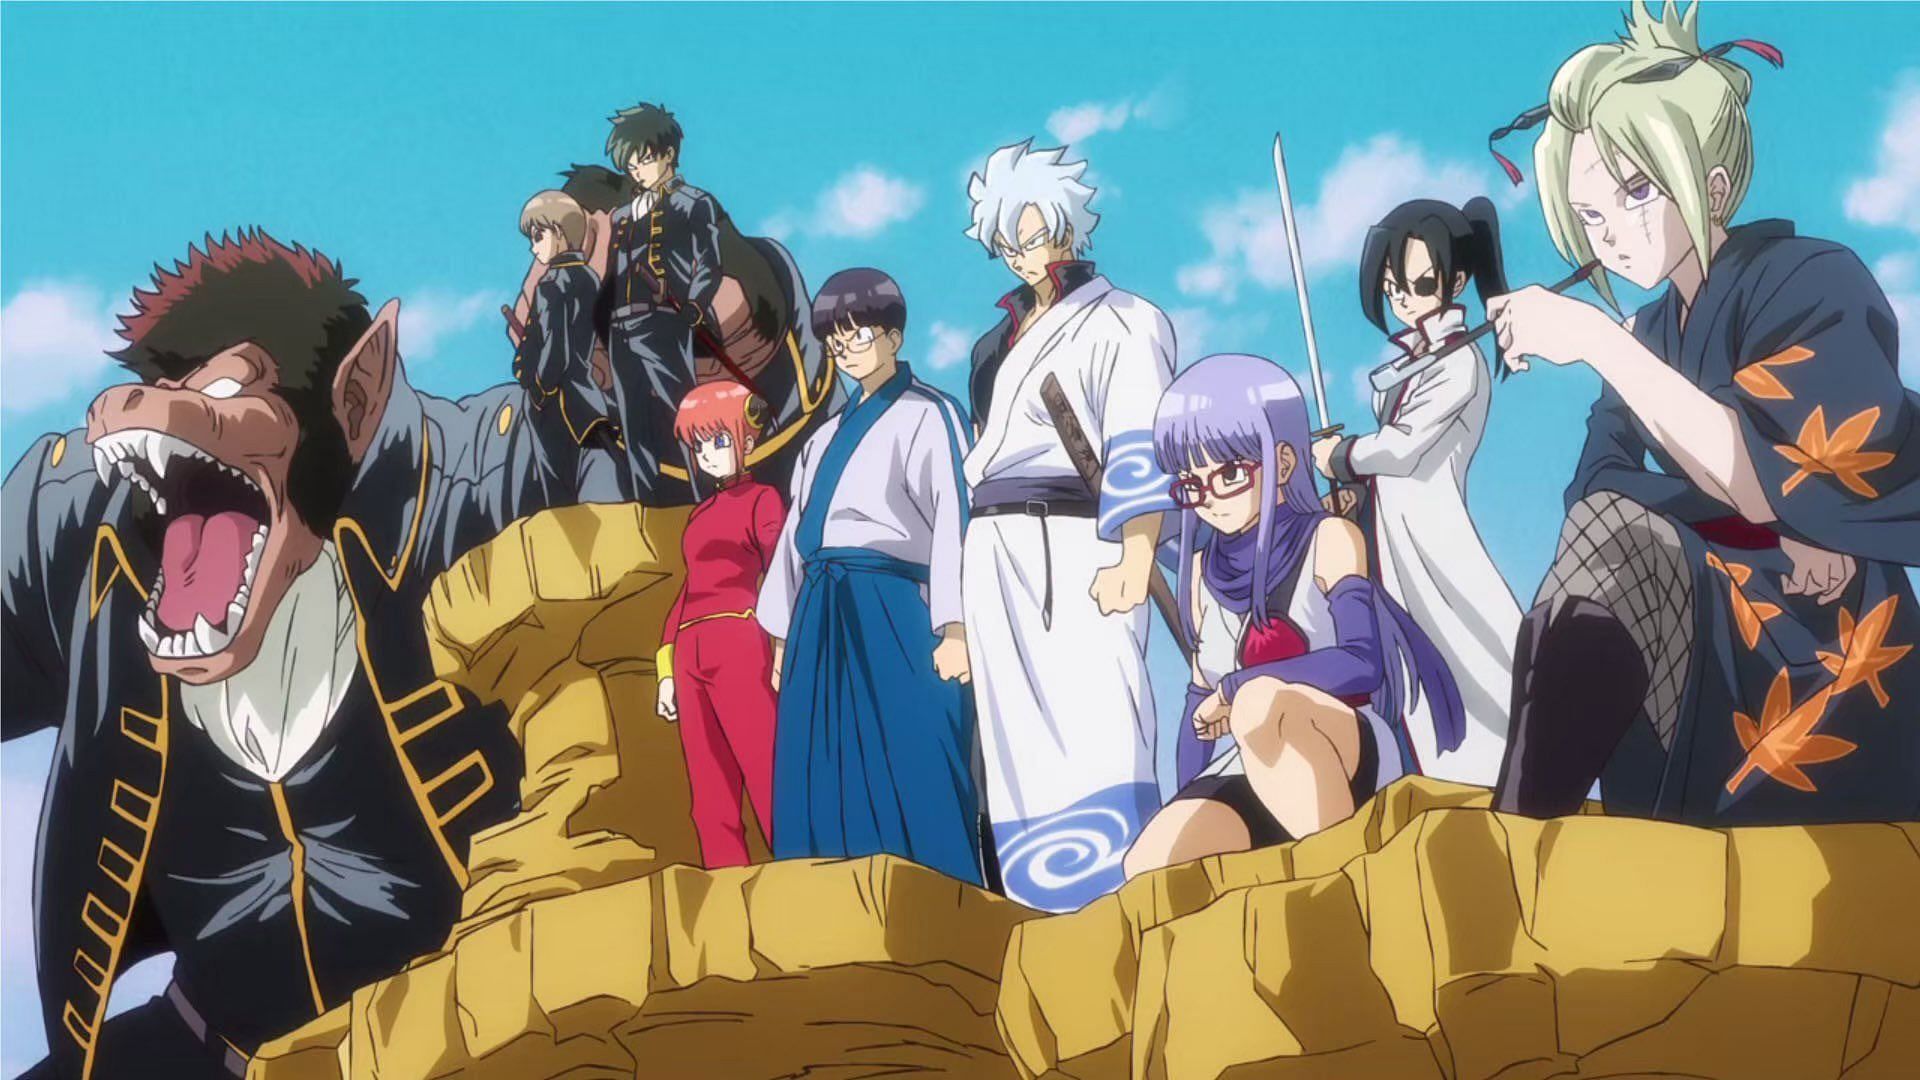 An image from a Gintama movie in which the series